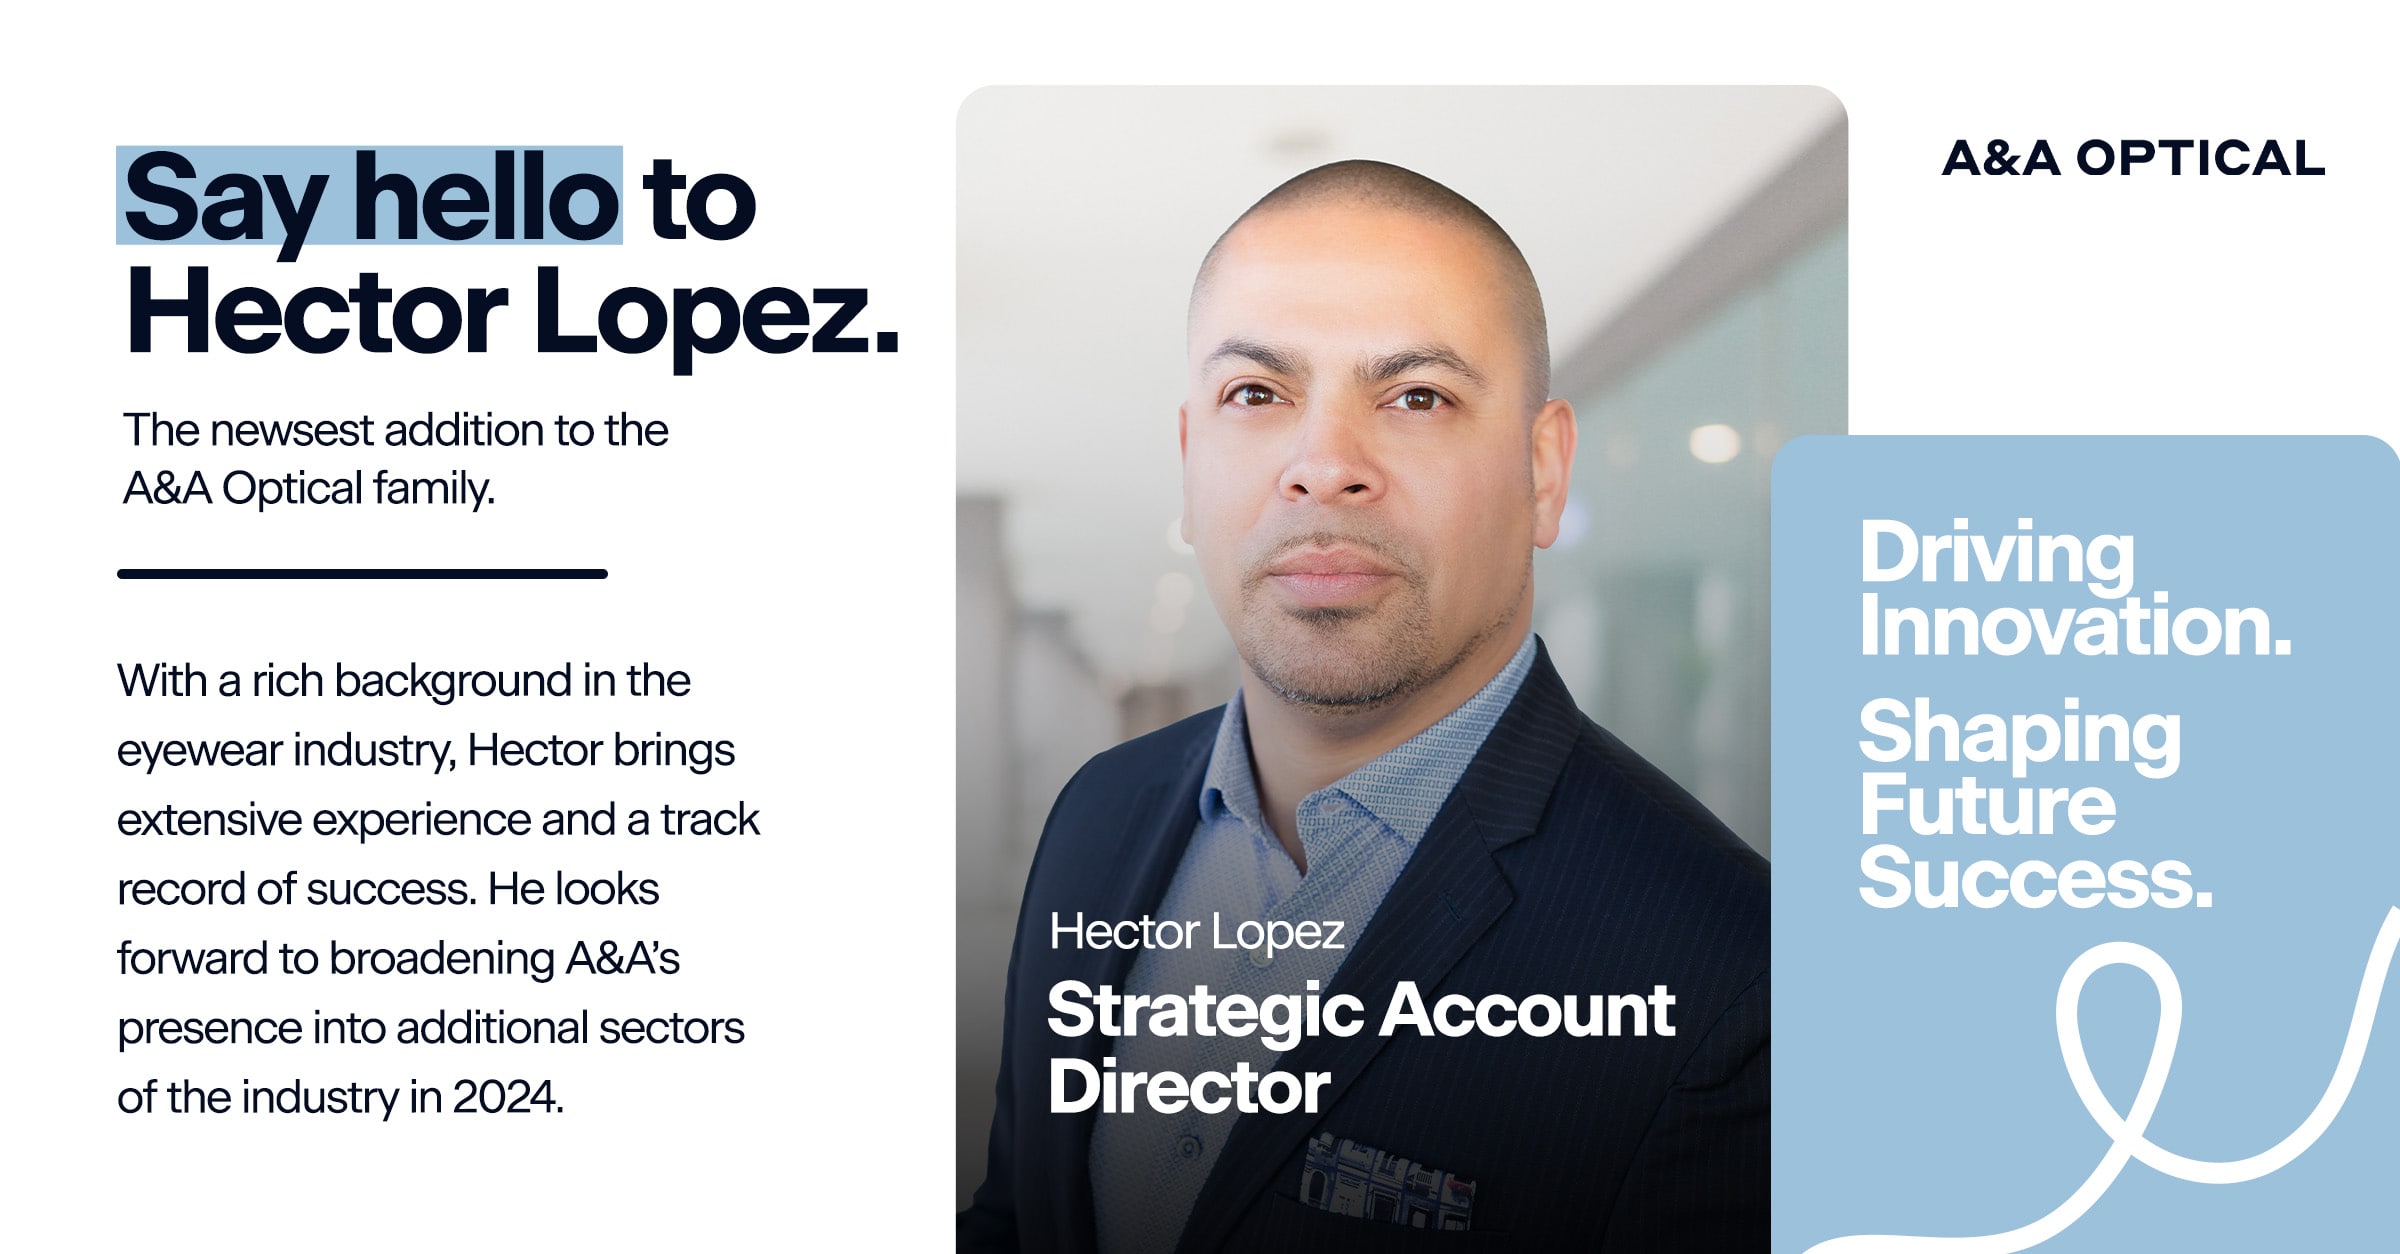 Hector Lopez, A&A Optical's Strategic Account Director